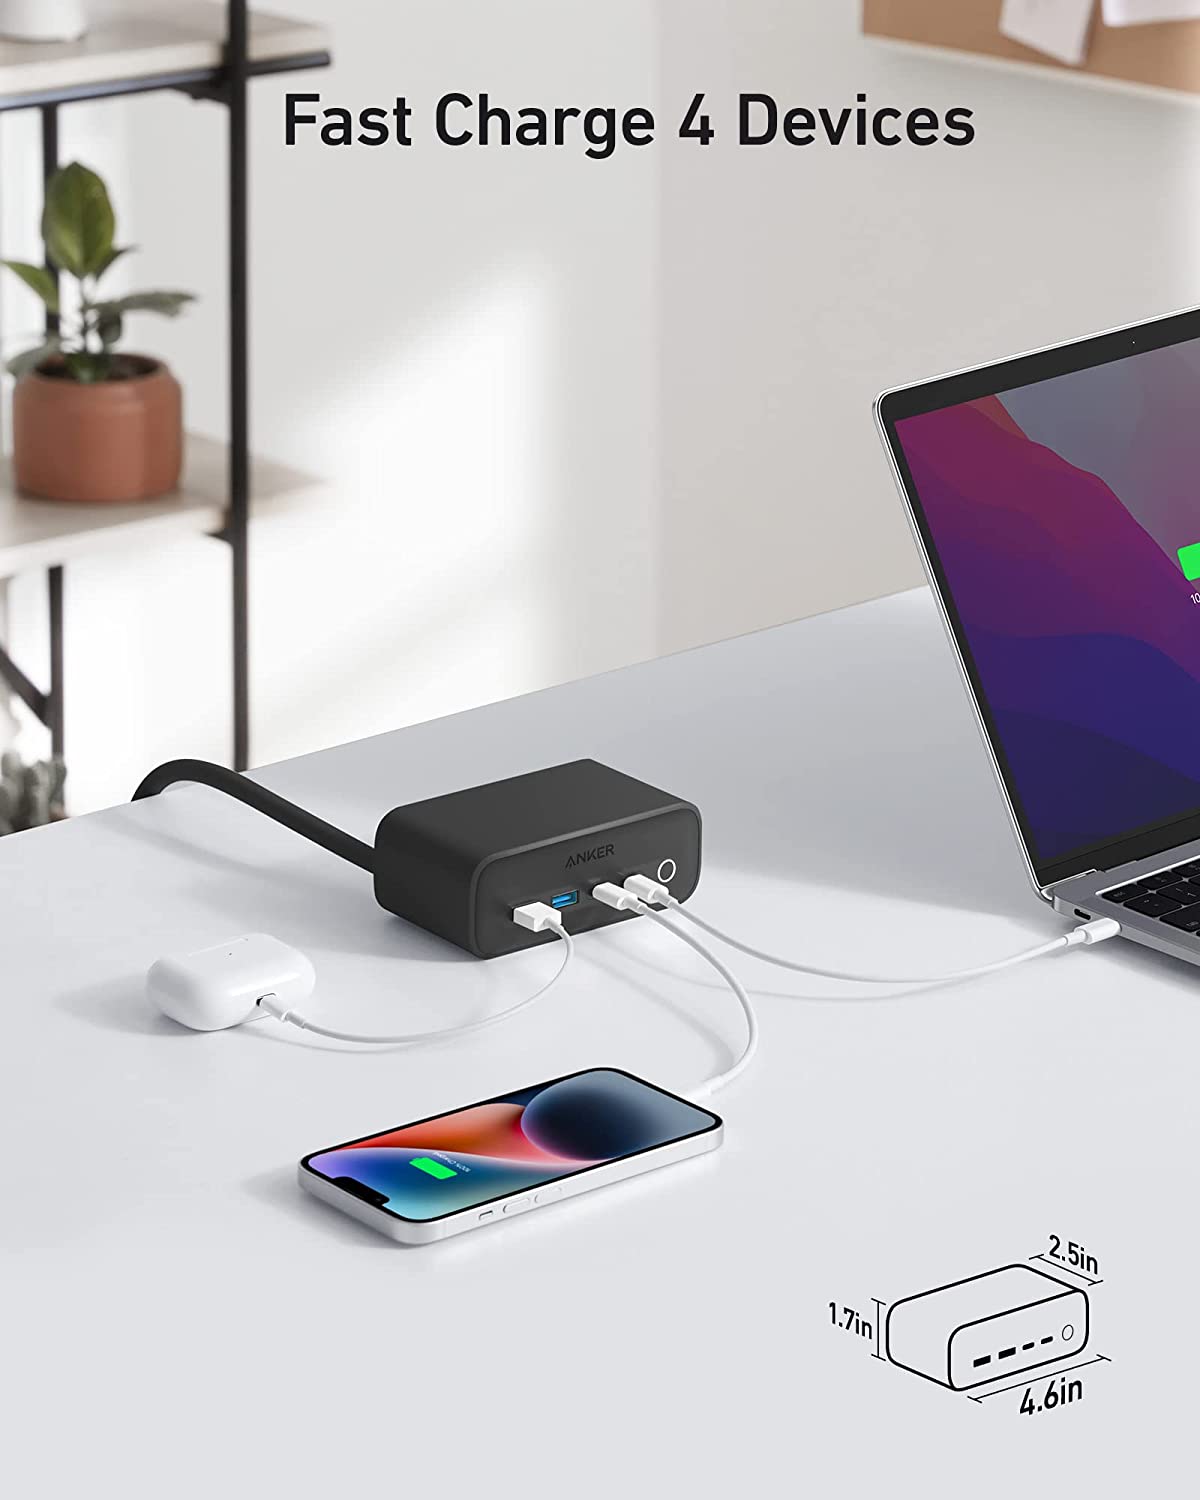 Anker 525 Charging Station with 5ft Extension Cord